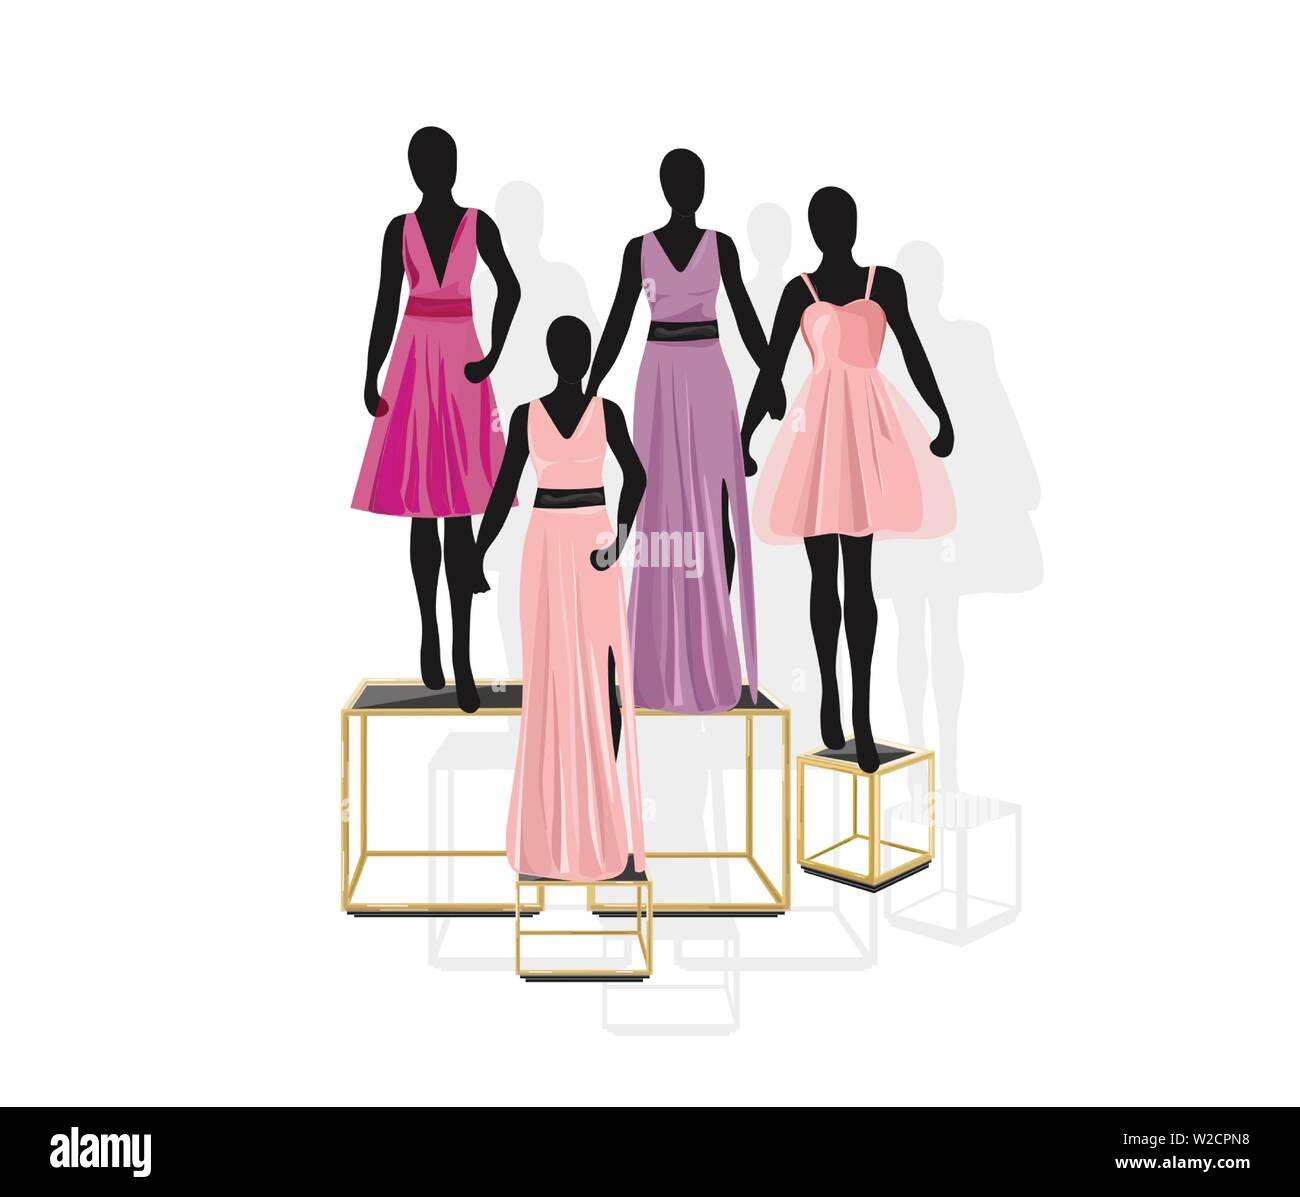 Mannequin Fashion dresses Vector illustration. Shopping concept front view Stock Vector